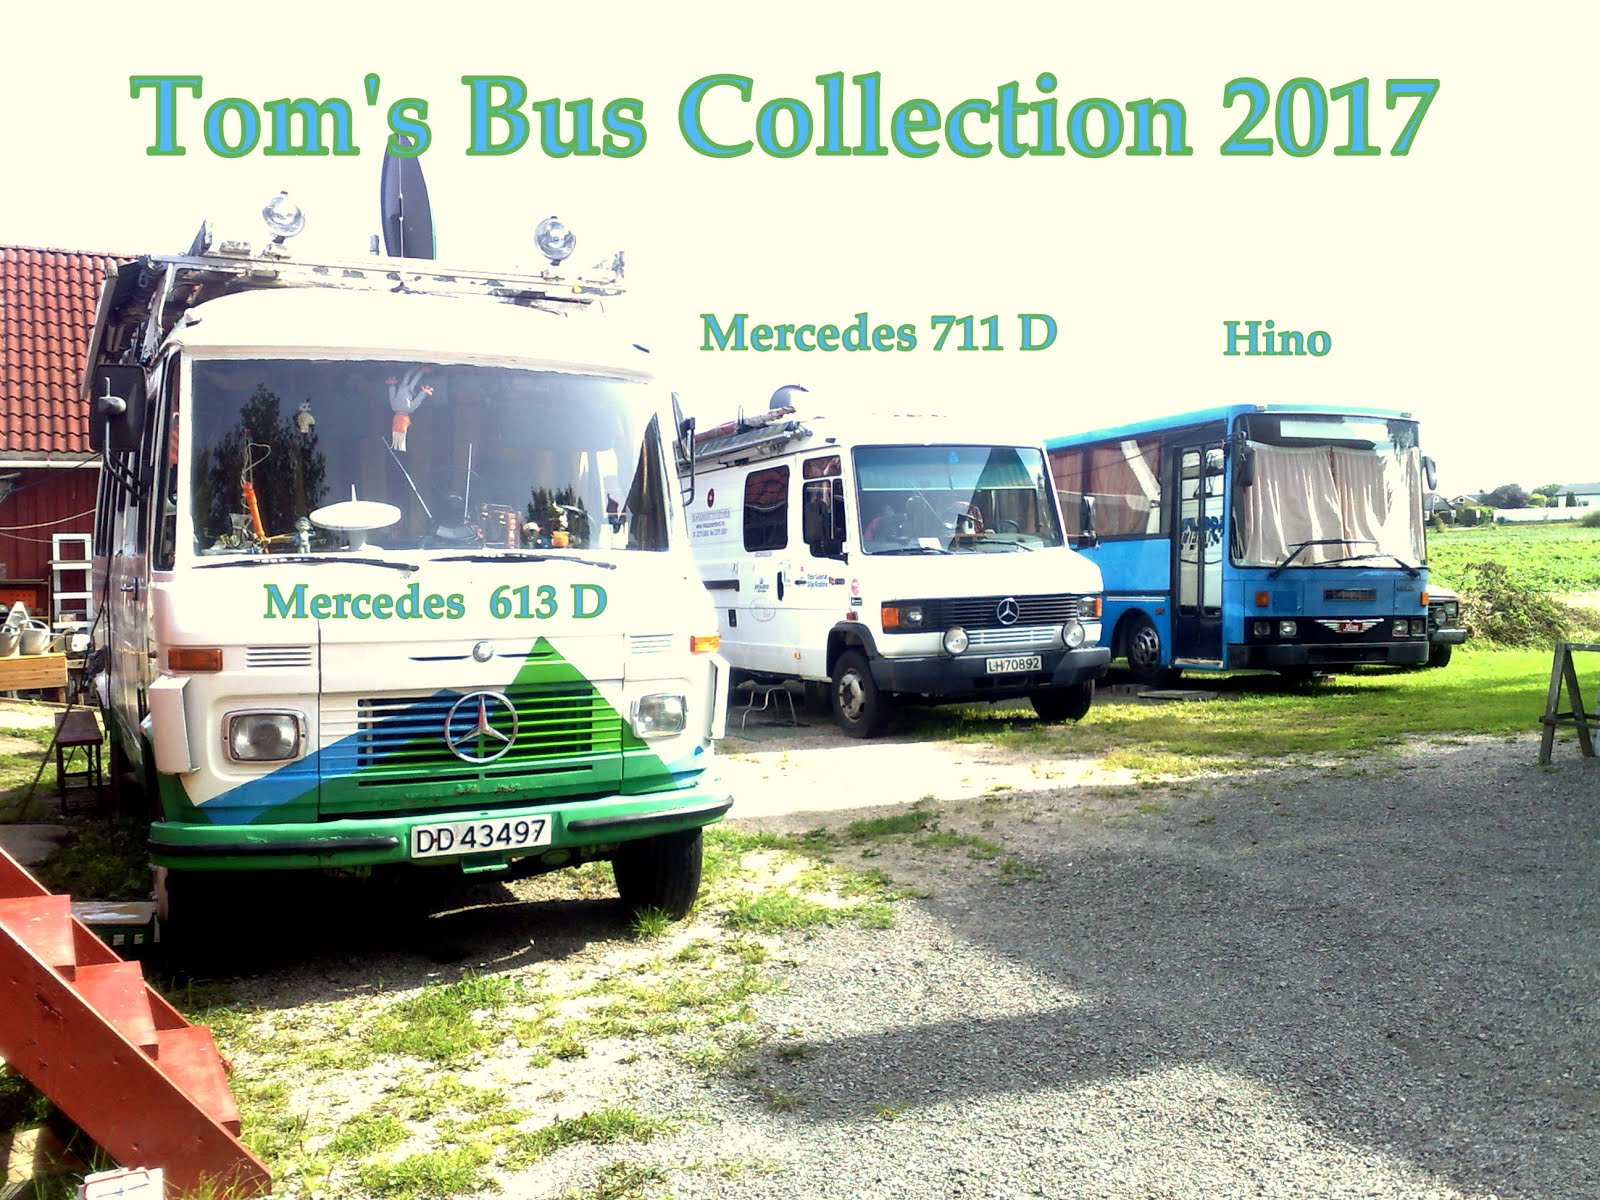 TOM's BUS COLLECTION